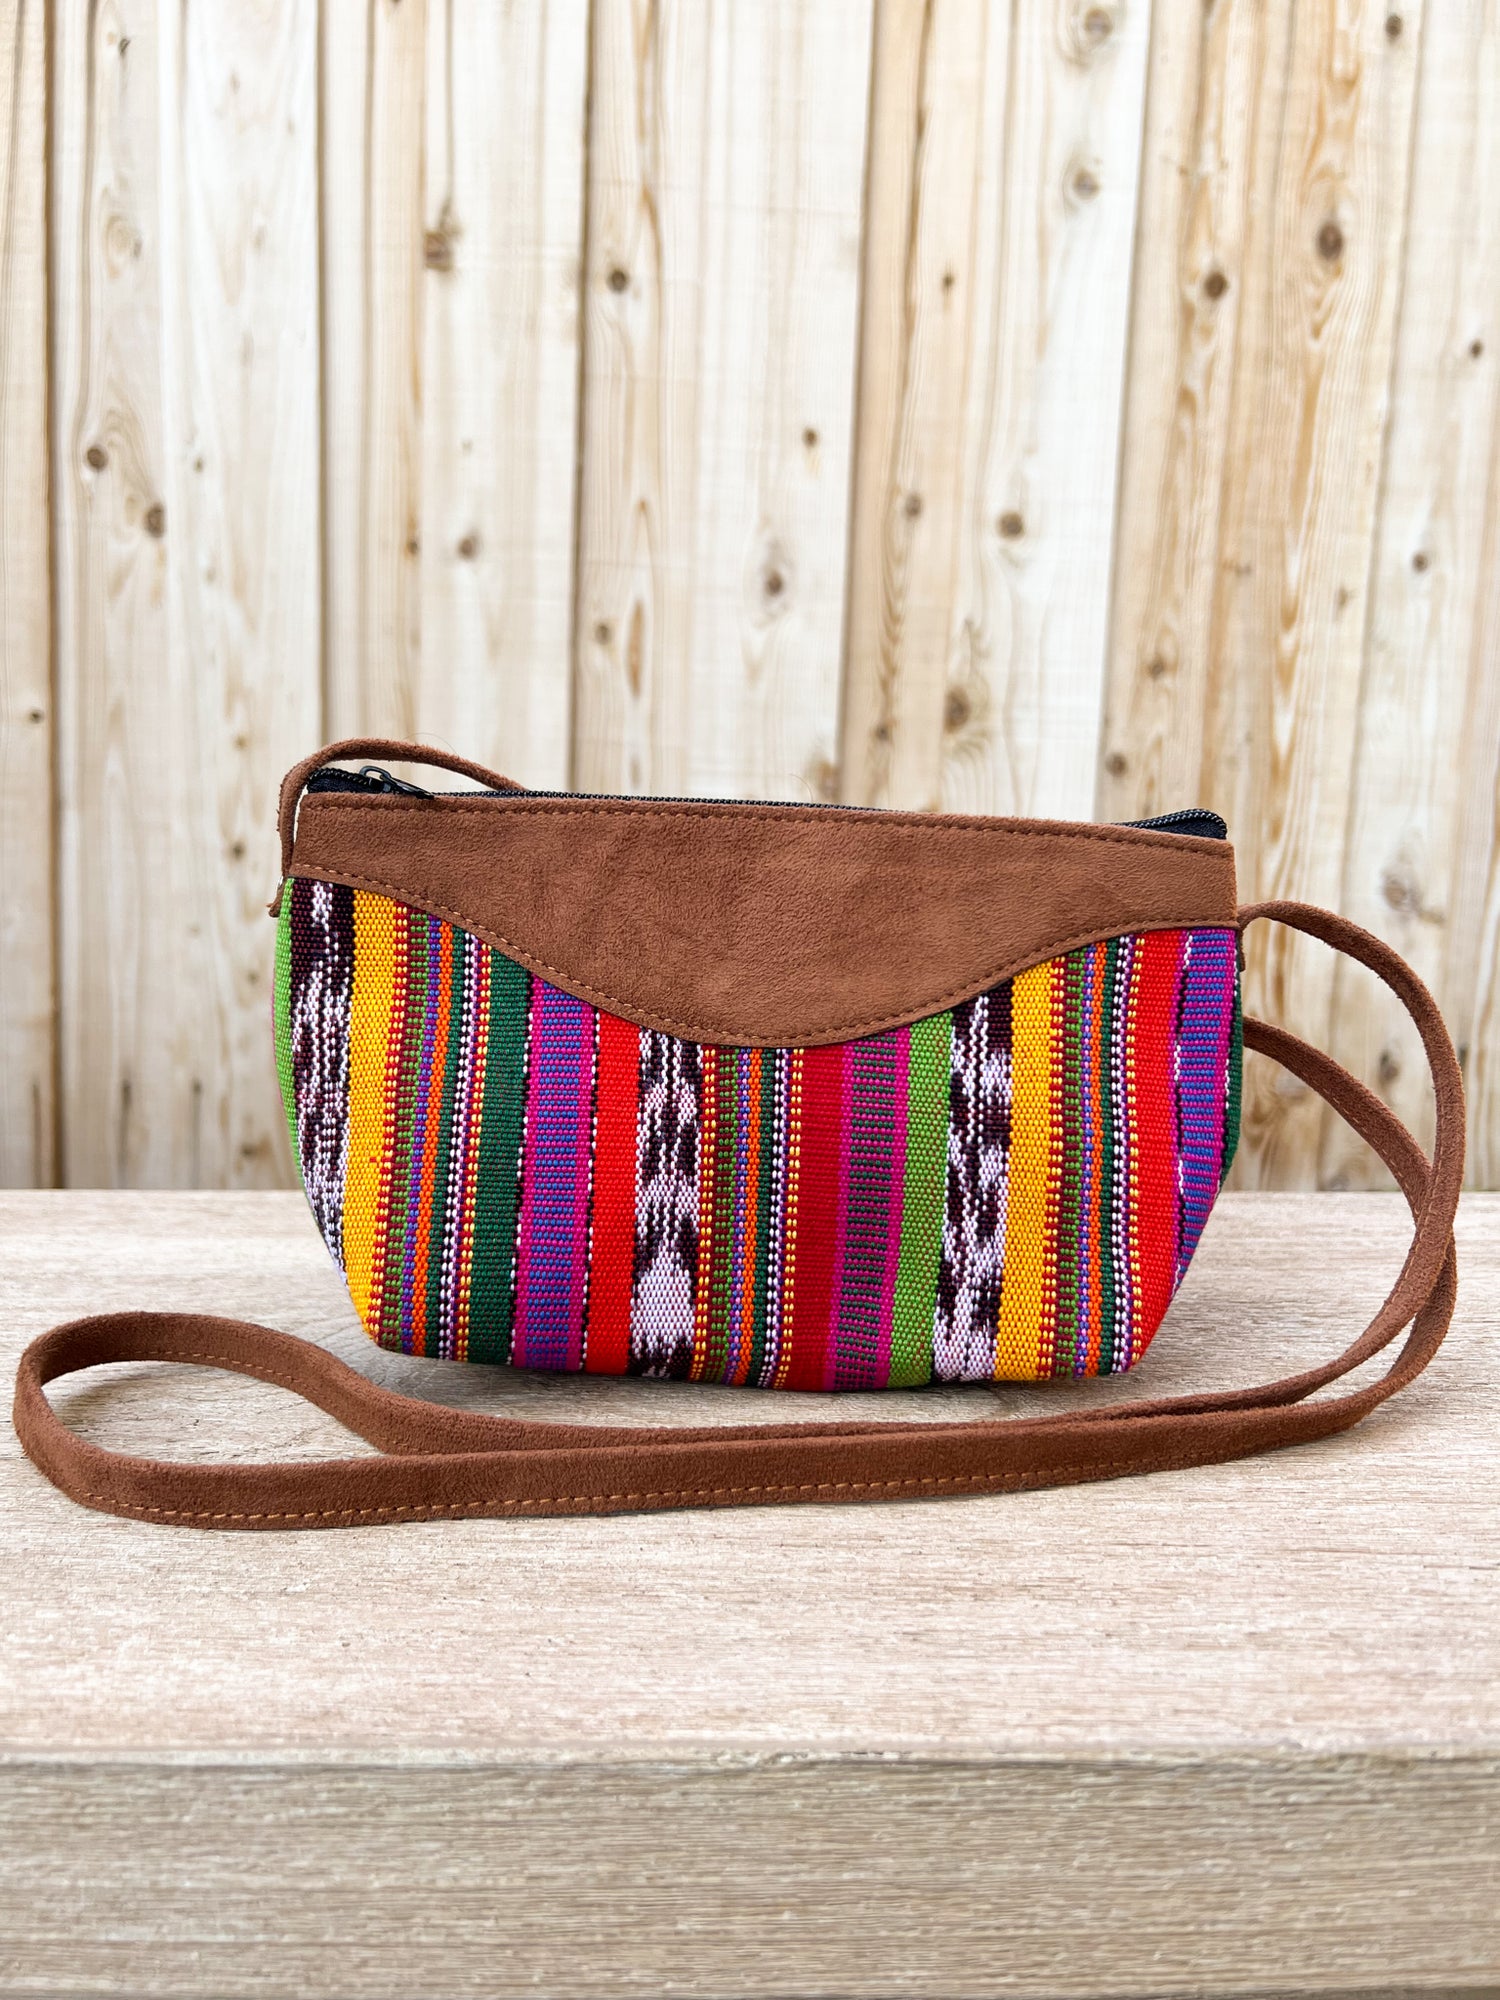 Our "Quetzal Crossbody Bags" are handmade in Guatemala. It's vibrant and colorful textiles make them a perfect and unique standout piece. A perfect size for your essentials only. Handwoven Intricate Fabric. Faux Suede Straps. Zipper Closure. Fully Lined. Handmade in Guatemala.